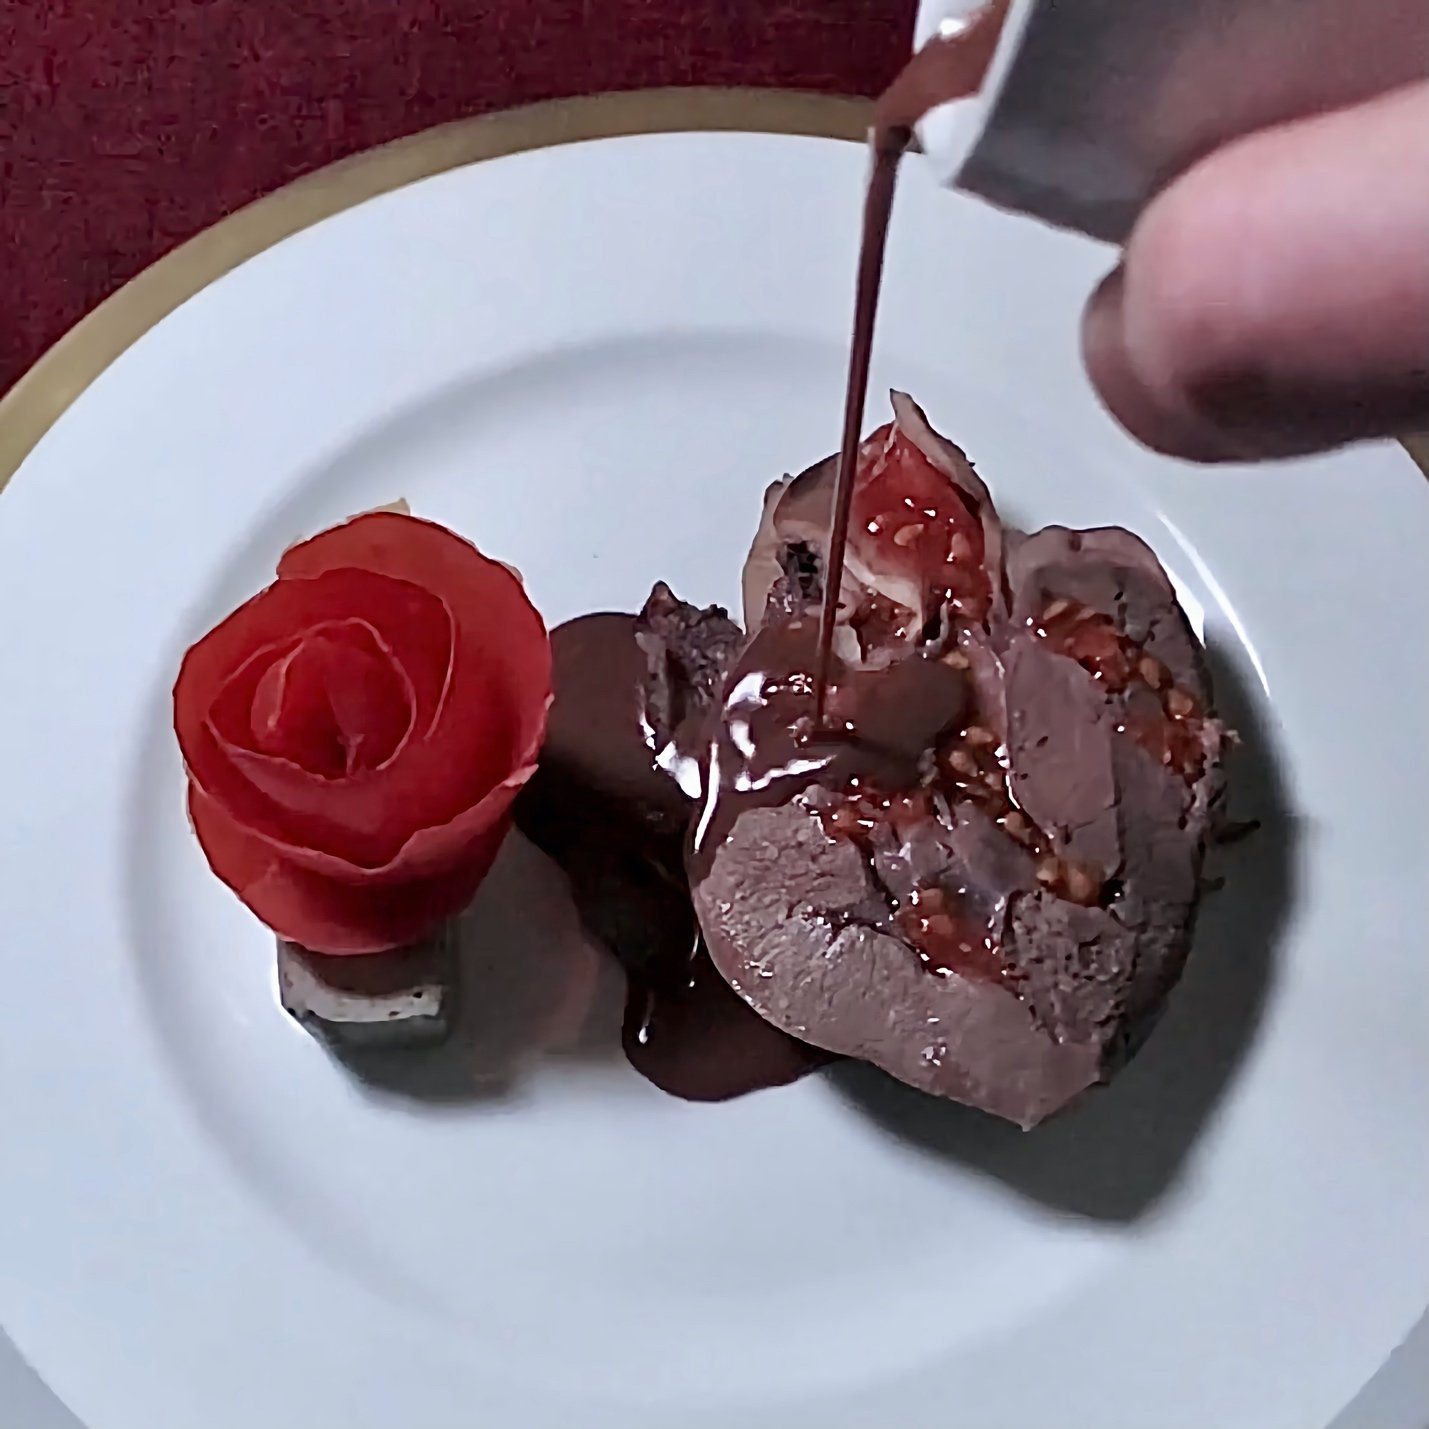 a literal heart, braised and served with chocolate sauce